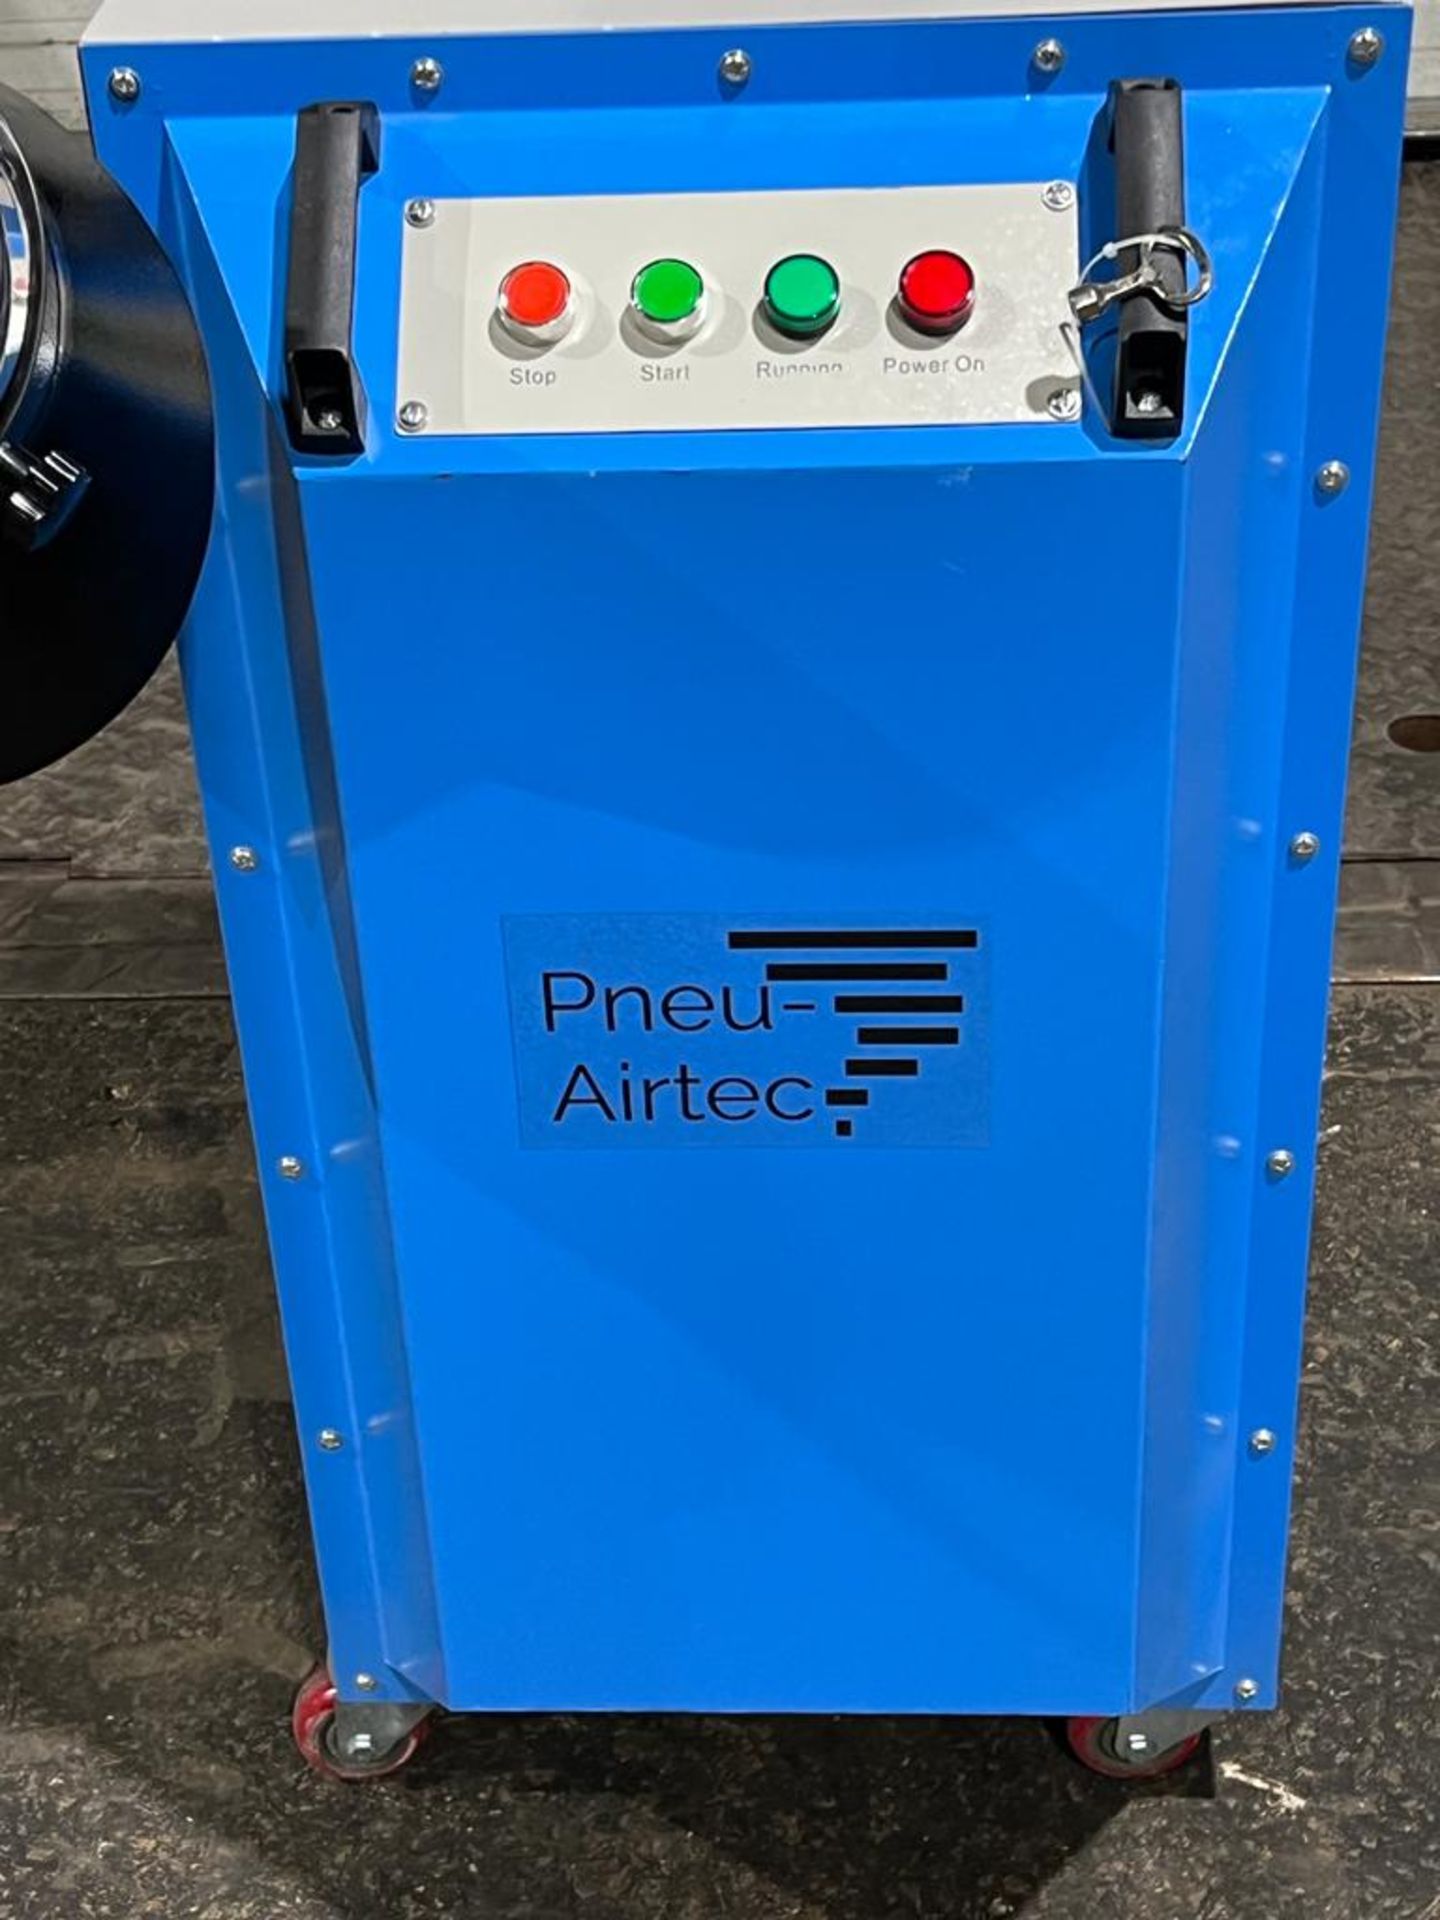 NEW UNIT Pneu-Airtec Fume Extractor with long reach snorkel arm - 120V single phase - MINT & - Image 2 of 3